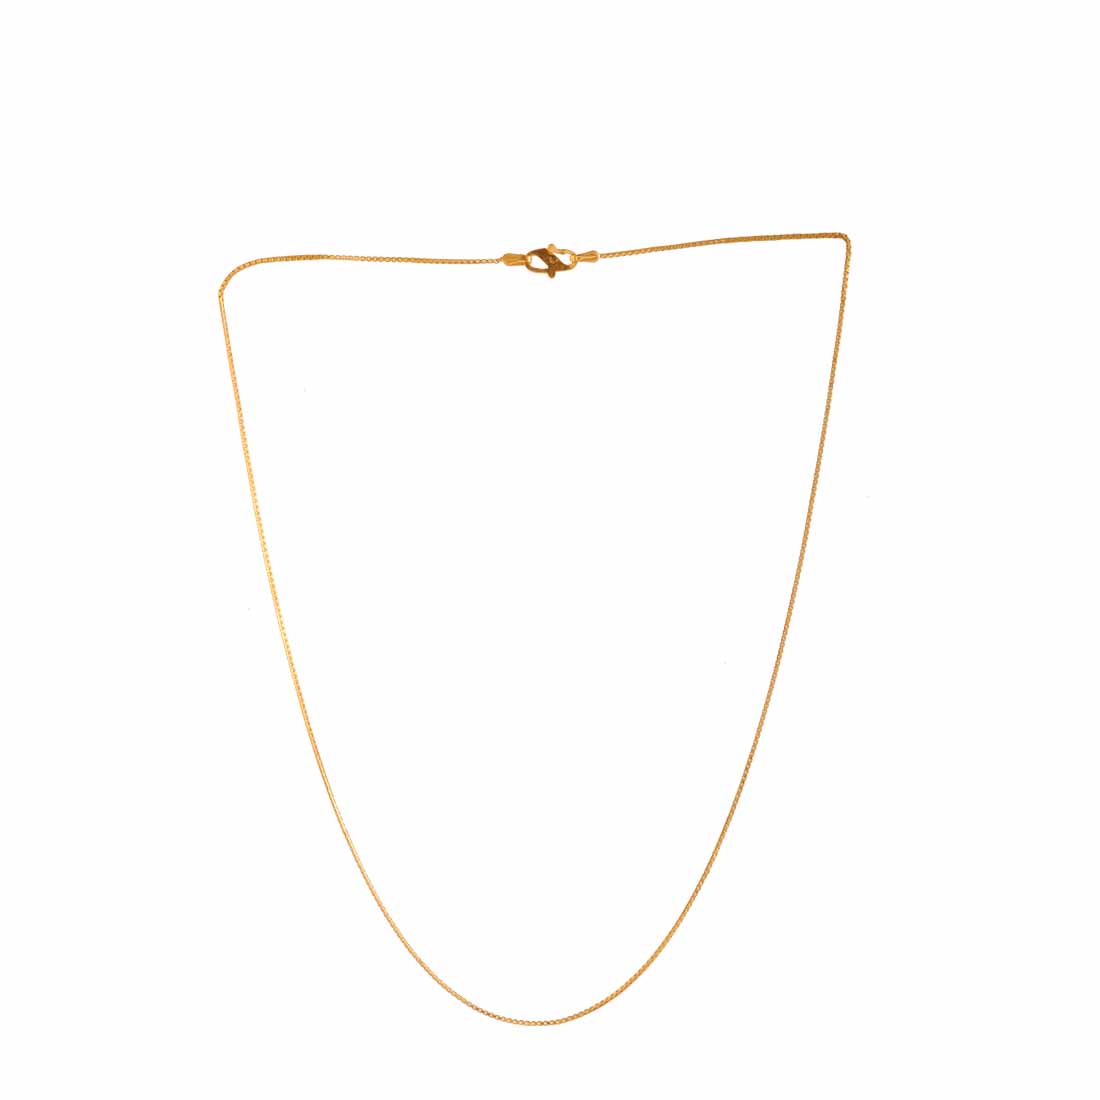 Buy Simple Flat Textured 16 Inch 6mm Flat Gold Tone Chain Online in India -  Etsy